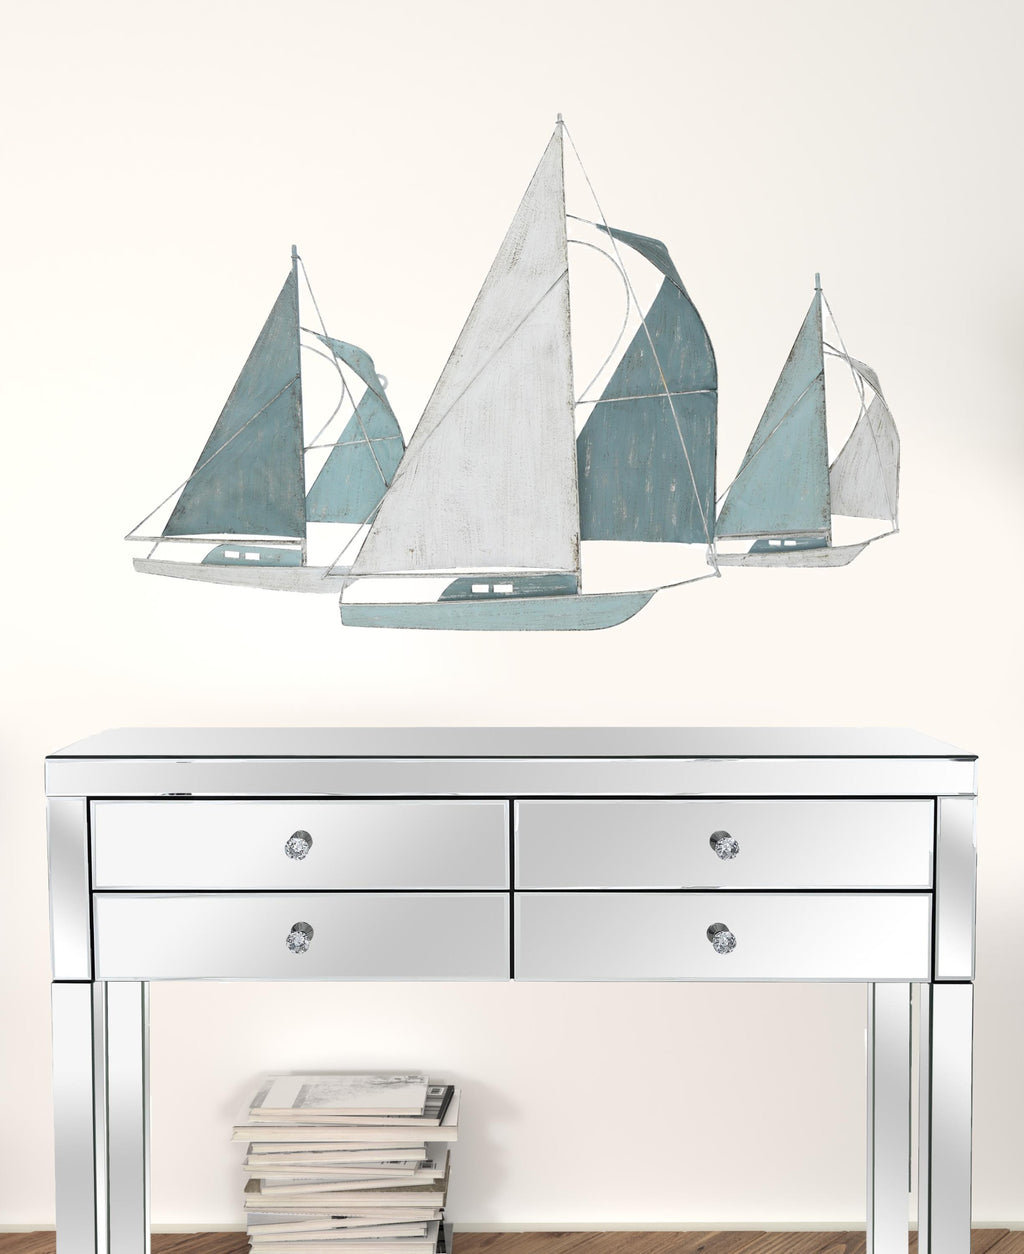 Sailboat Metal Centerpiece in Distressed Finish - 99fab 